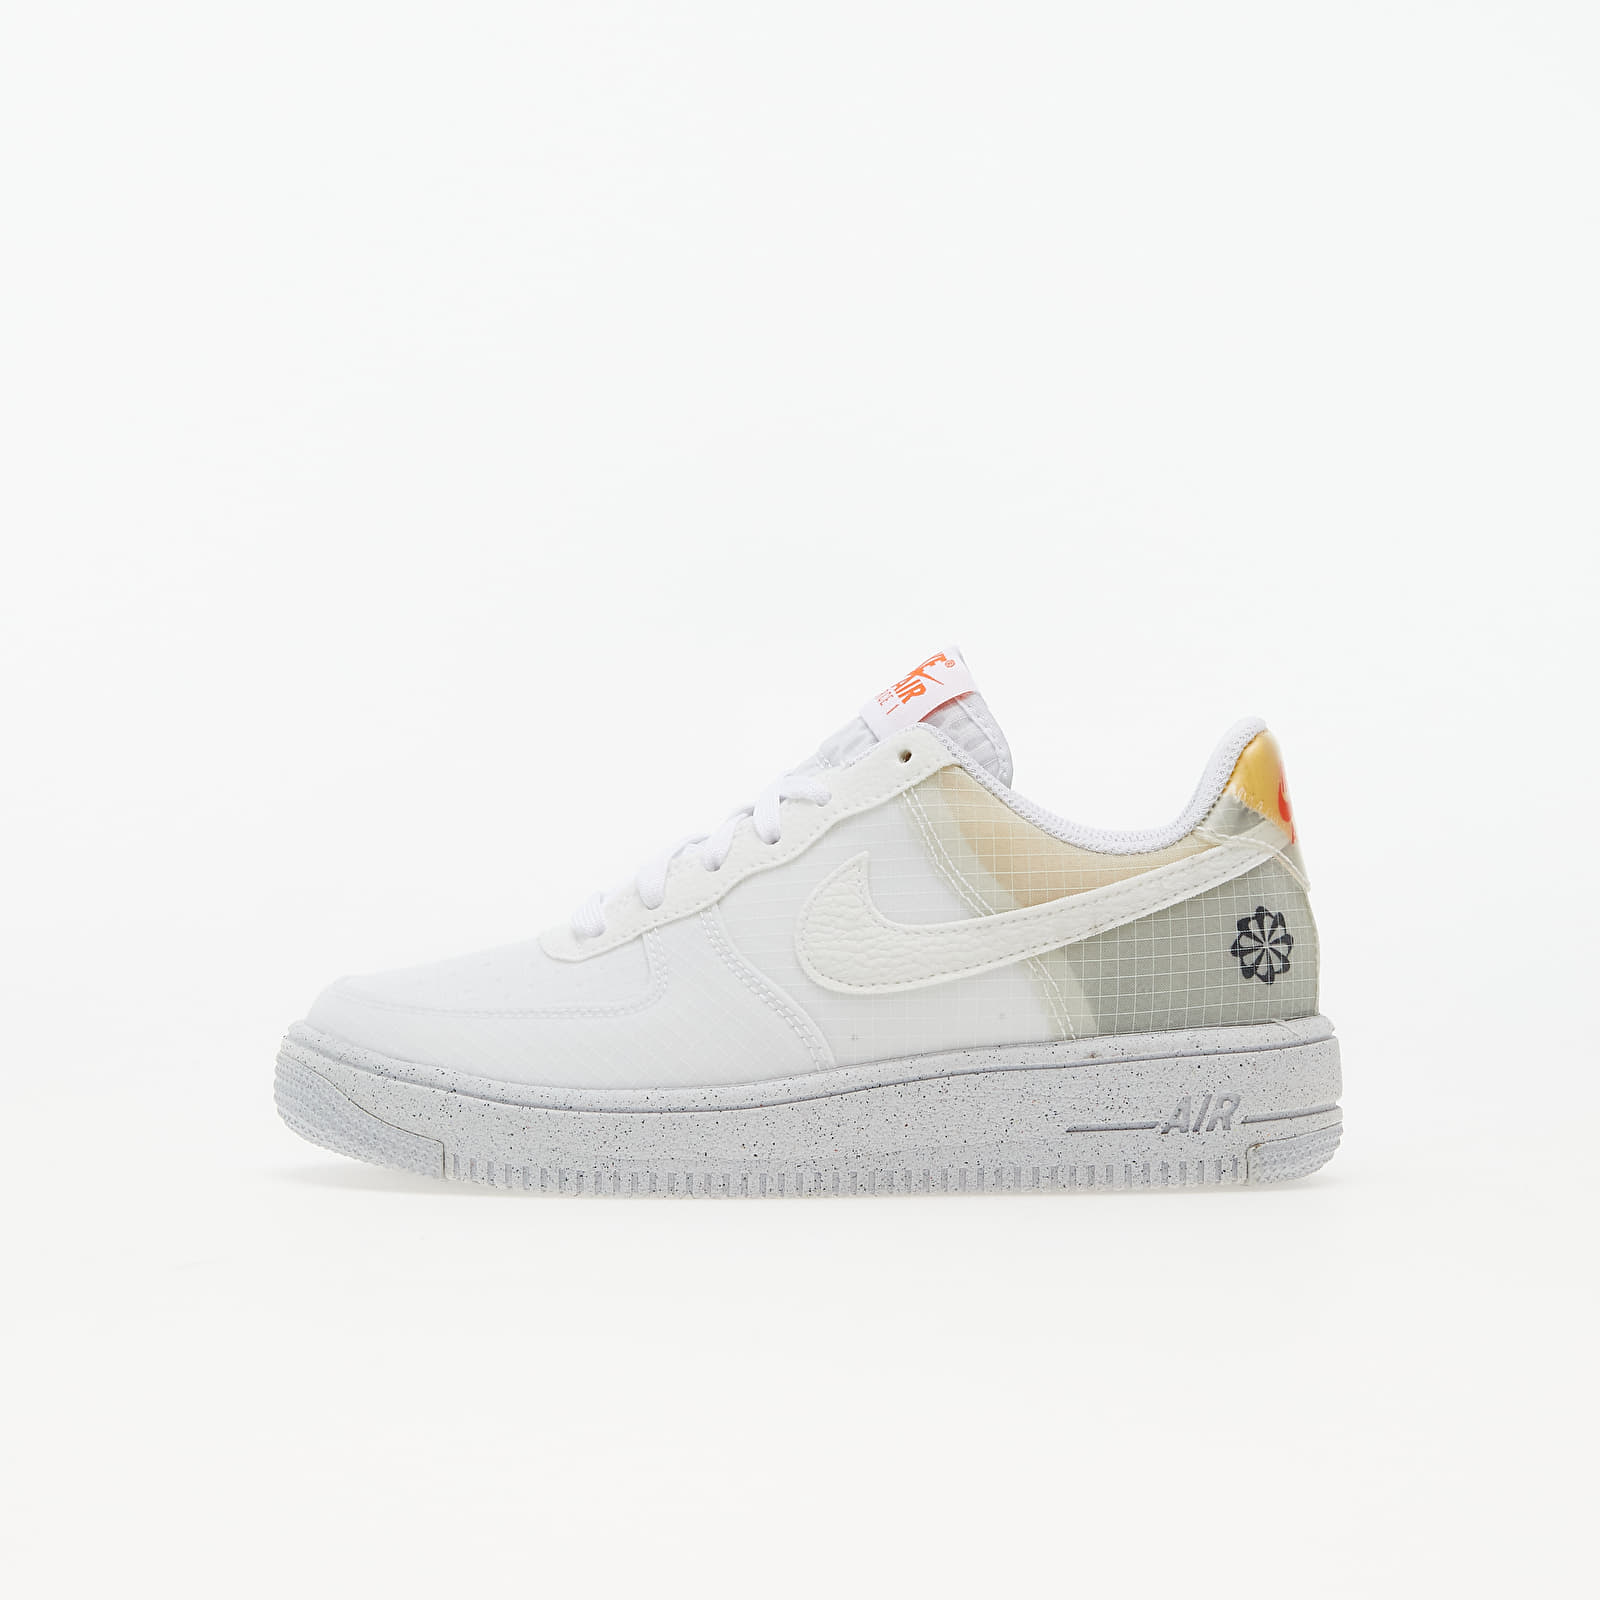 Chaussures et baskets enfants Nike Air Force 1 Crater (GS) White/ White-Orange